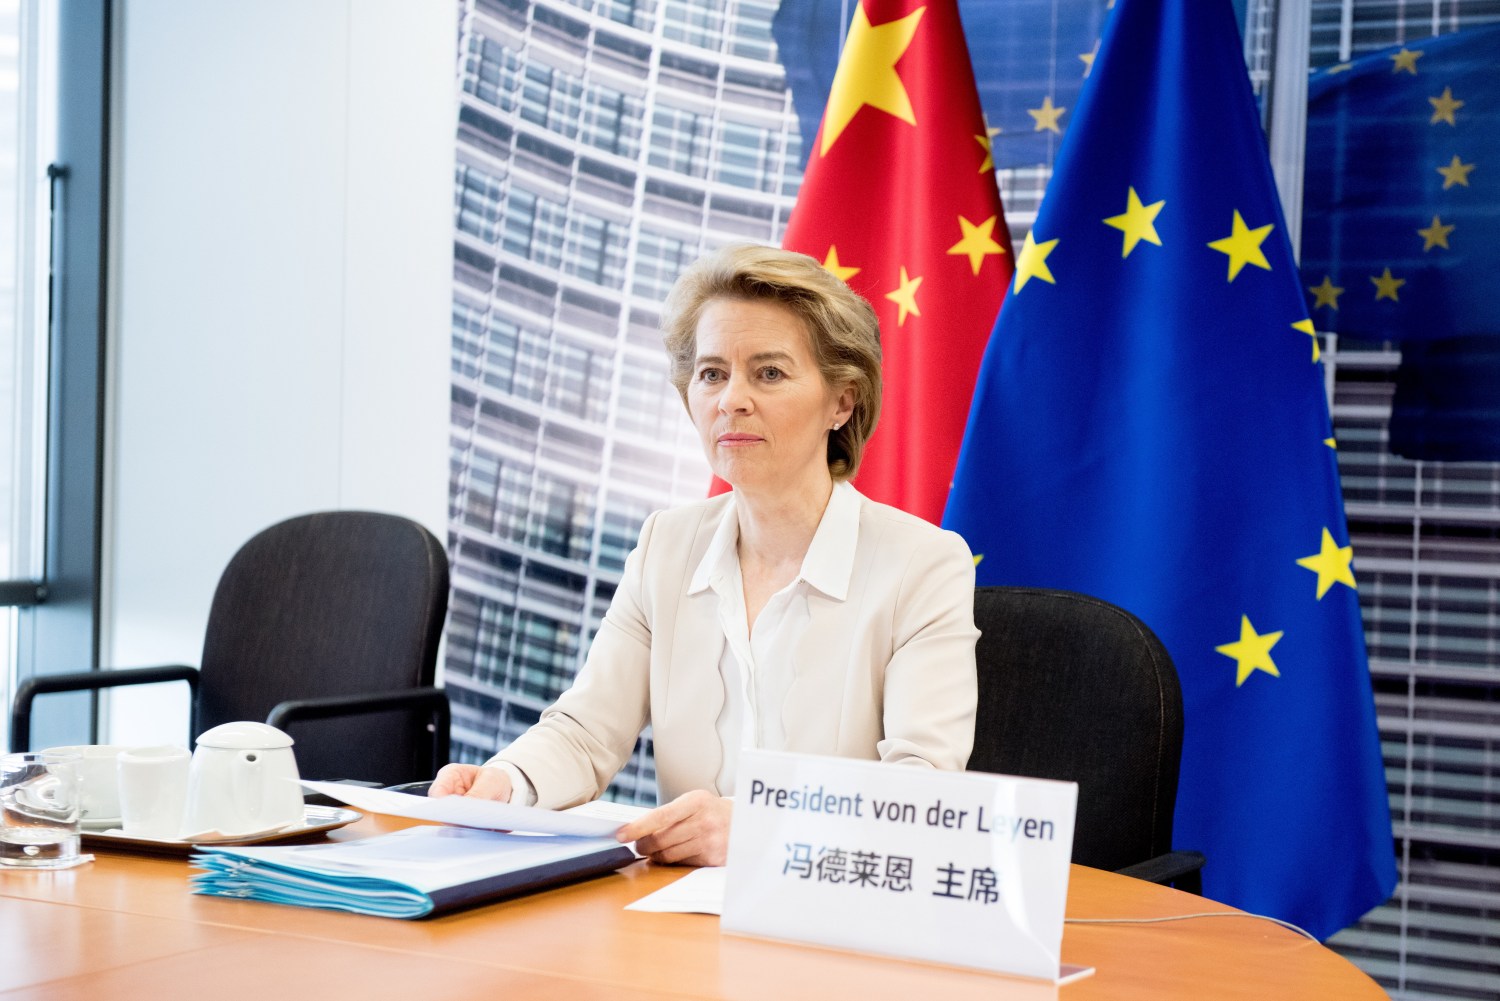 BRUSSELS, BELGIUM- The President of the European Commission, Ursula von der Leyen, attends the 22nd meeting by videoconference of leaders of China and the European Union (EU) in Brussels, Belgium, on June 22, 2020. China and the Union European (EU) reaffirmed this Monday (22) their commitment to conclude a comprehensive bilateral investment agreement in 2020.